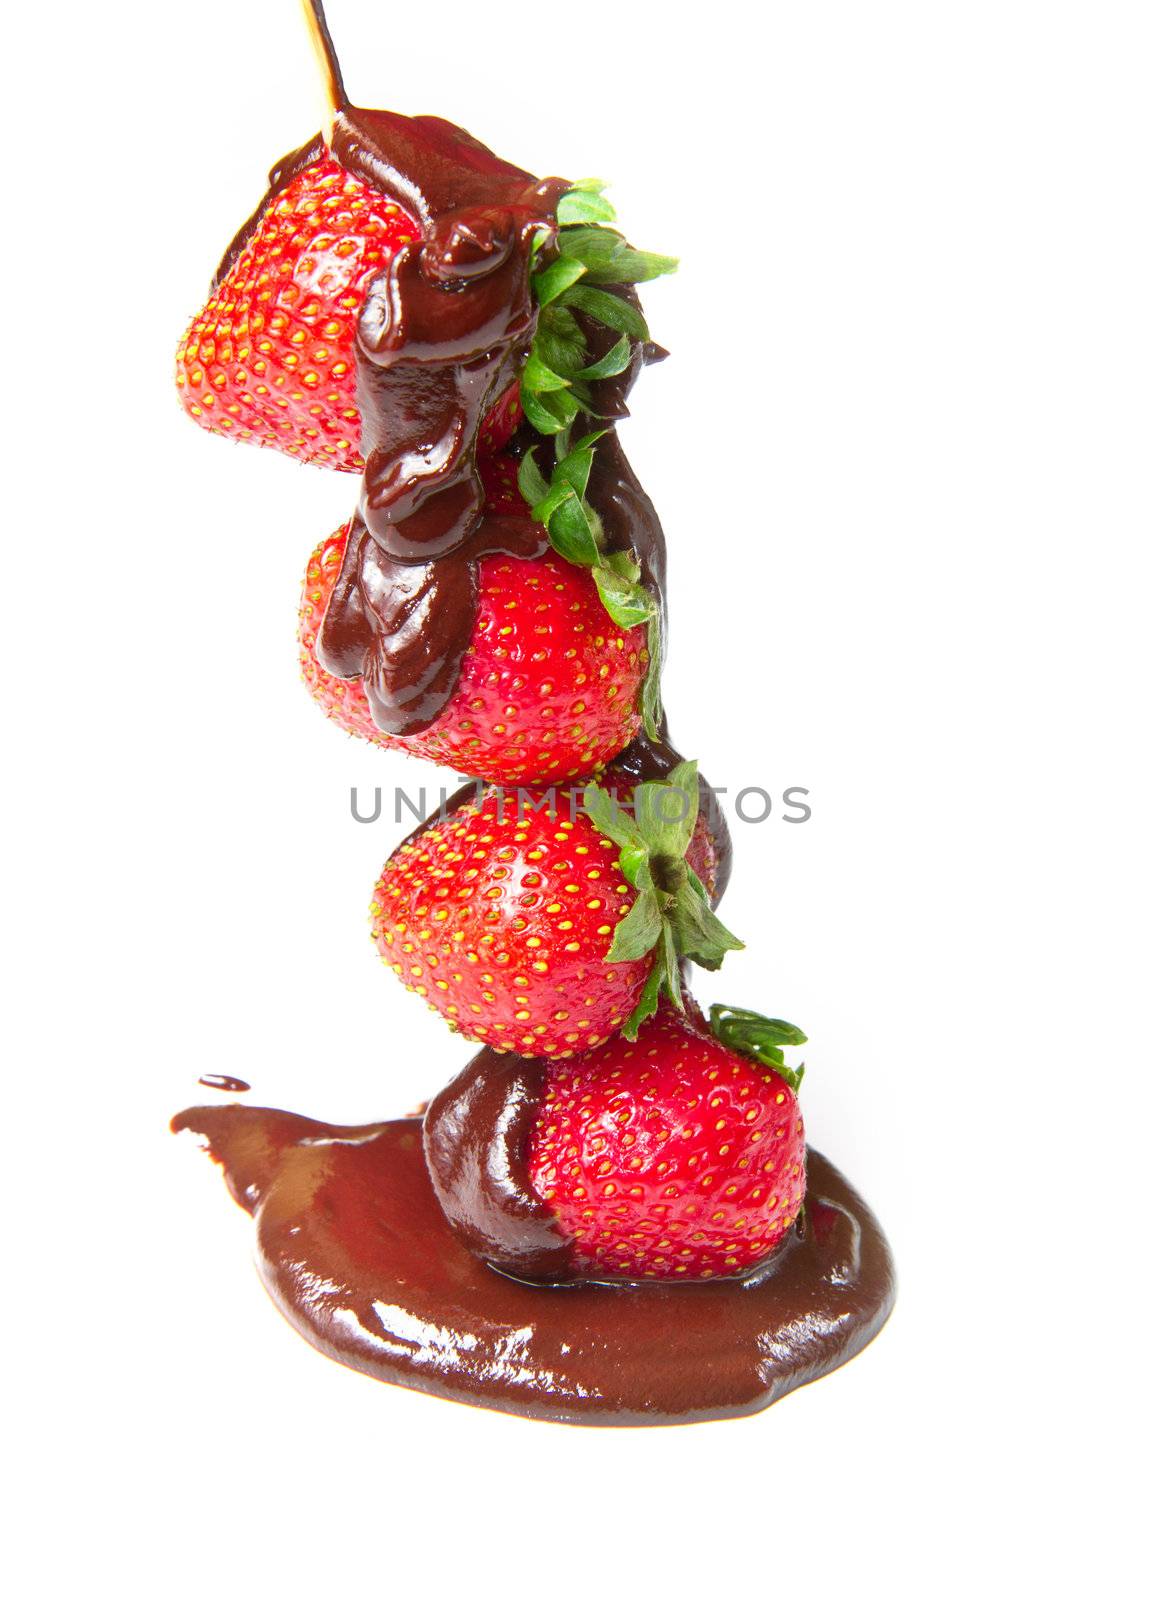 strawberries and chocolate on a white background 